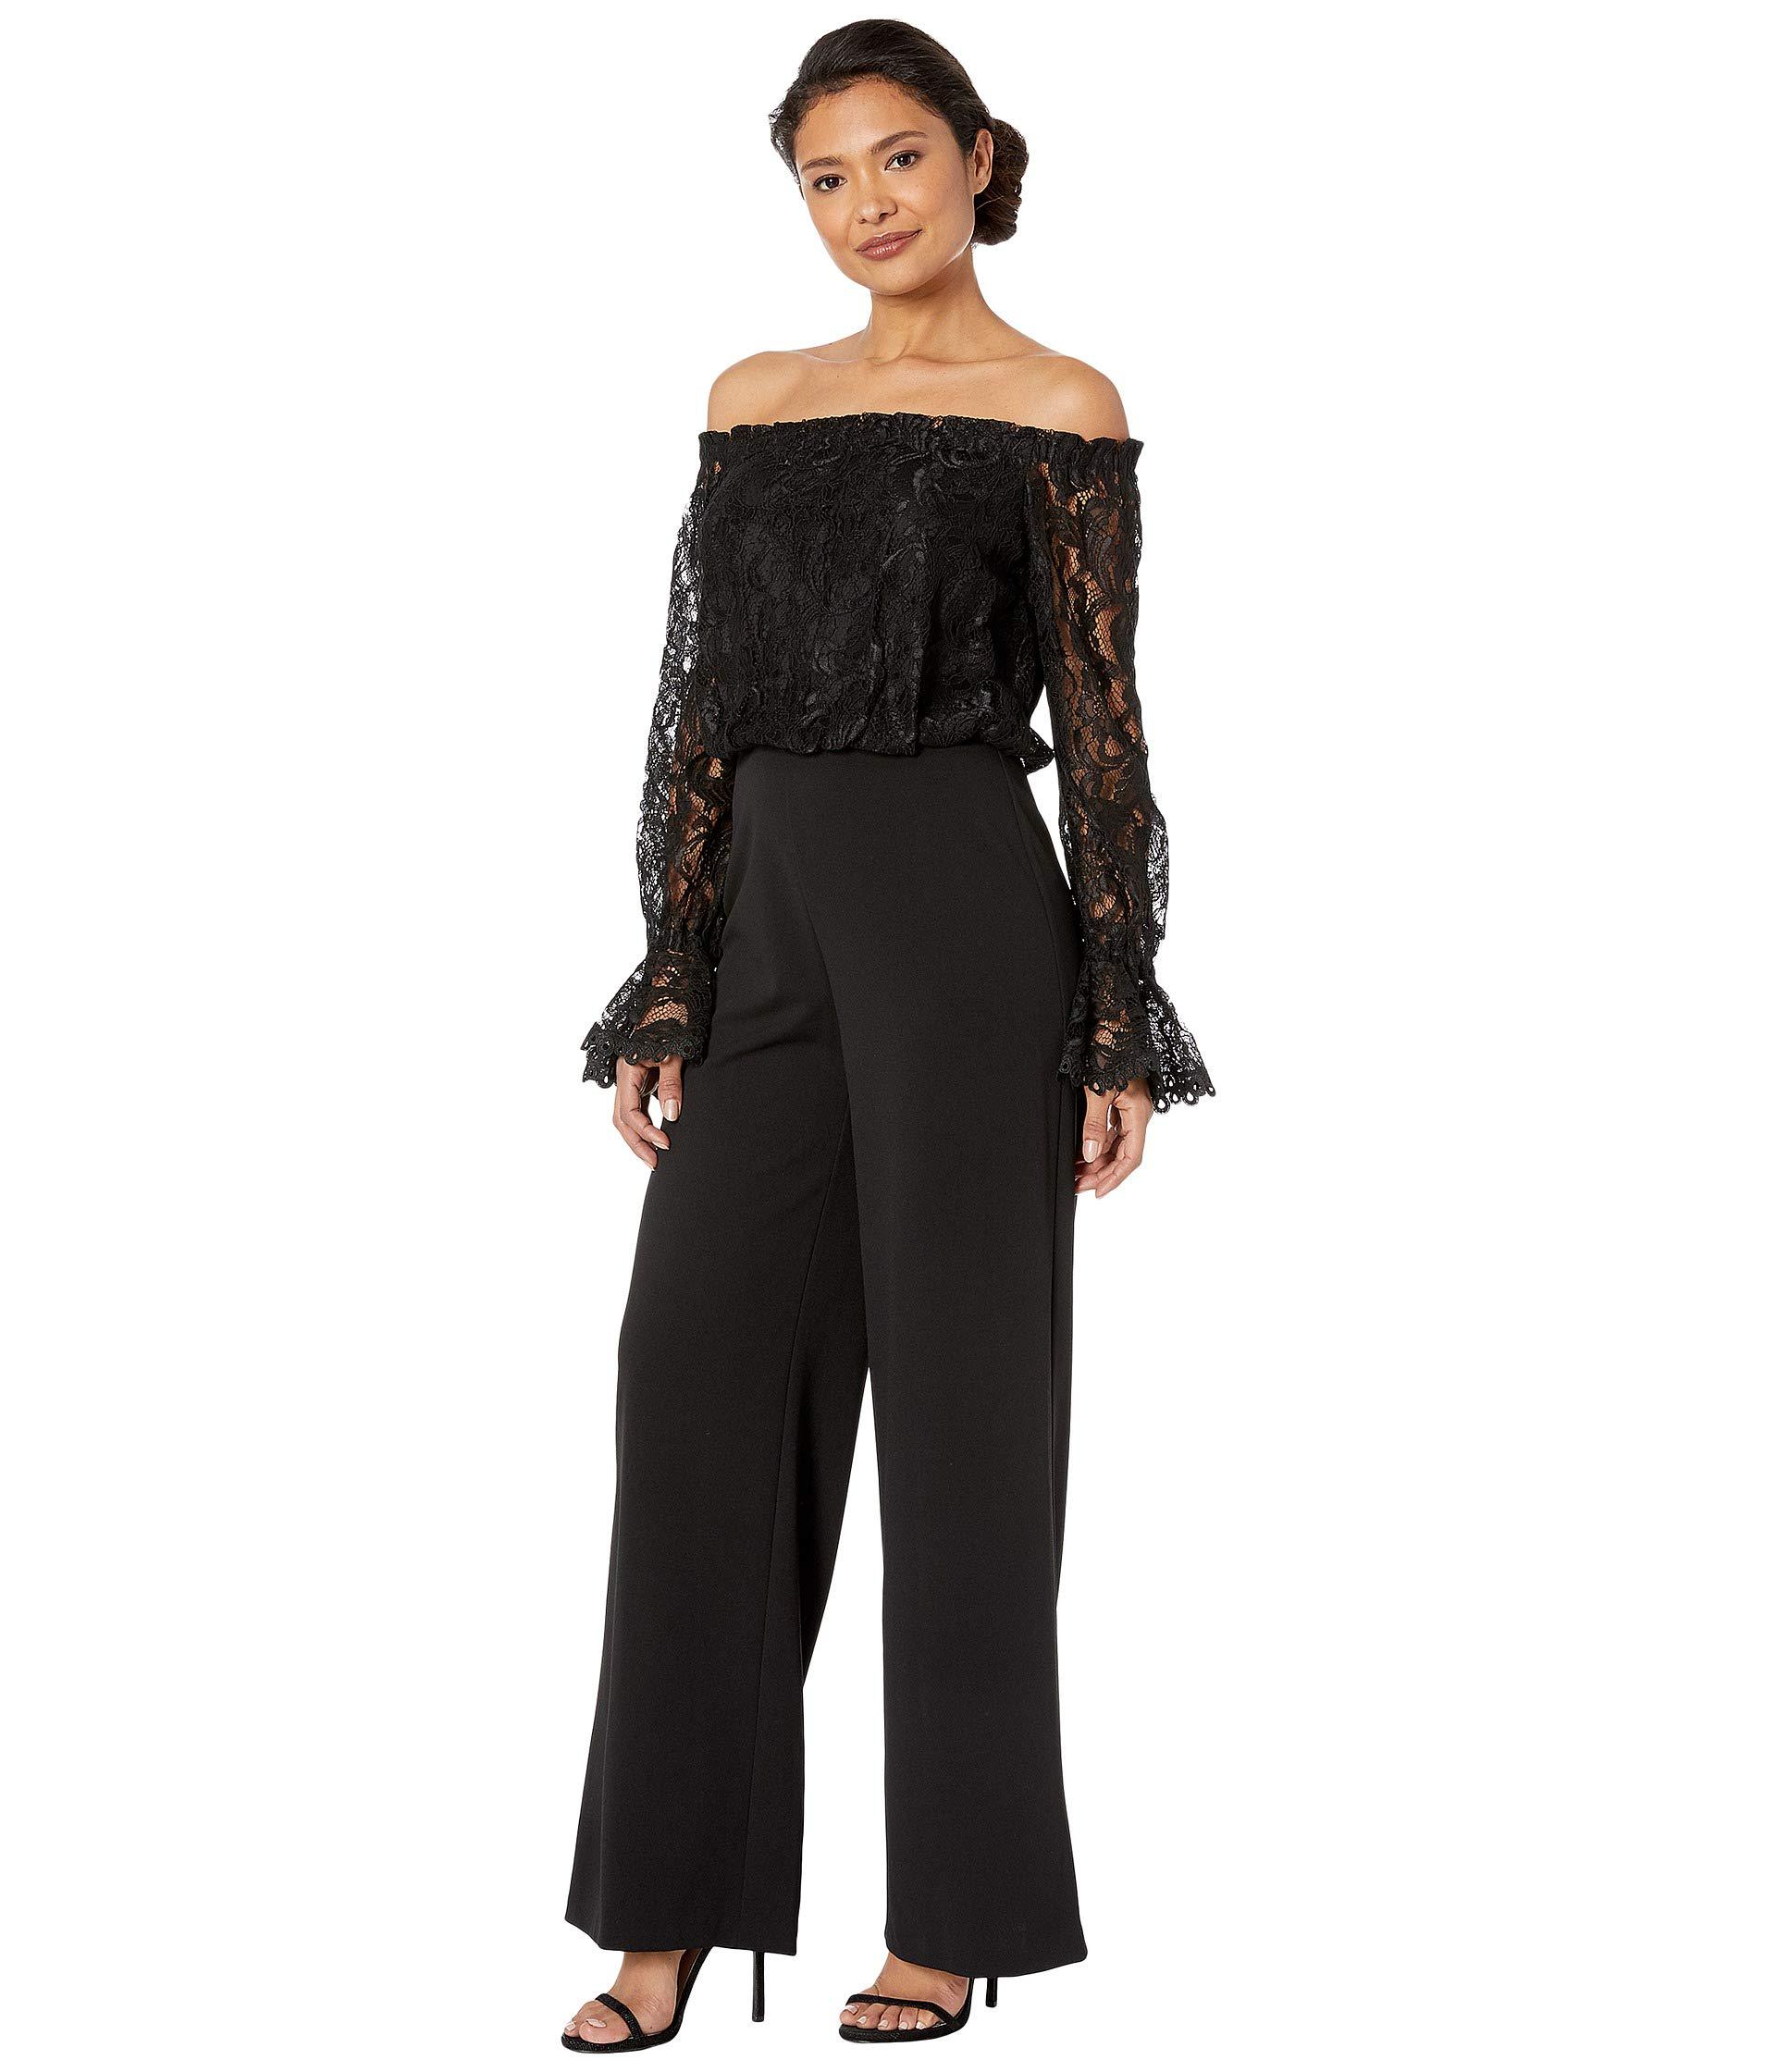 Adrianna Papell Off-the-shoulder Lace Jumpsuit in Black - Lyst